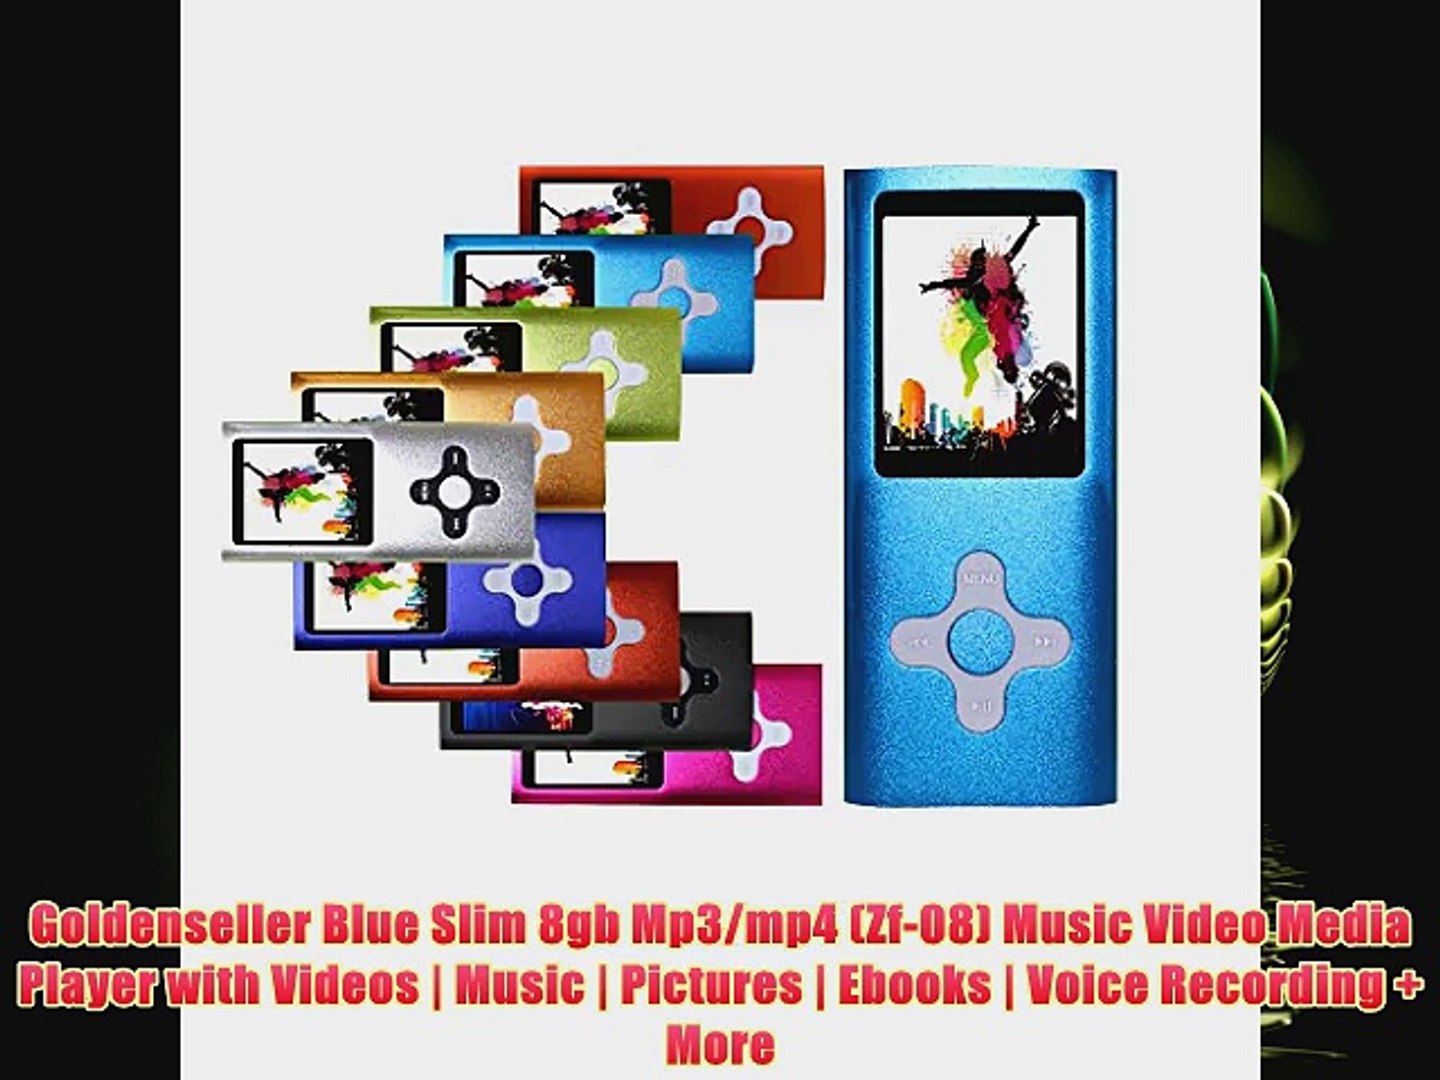 Goldenseller Blue Slim 8gb Mp3mp4 Zf08 Music Video Media Player with Videos Music Pictures Ebooks Vo